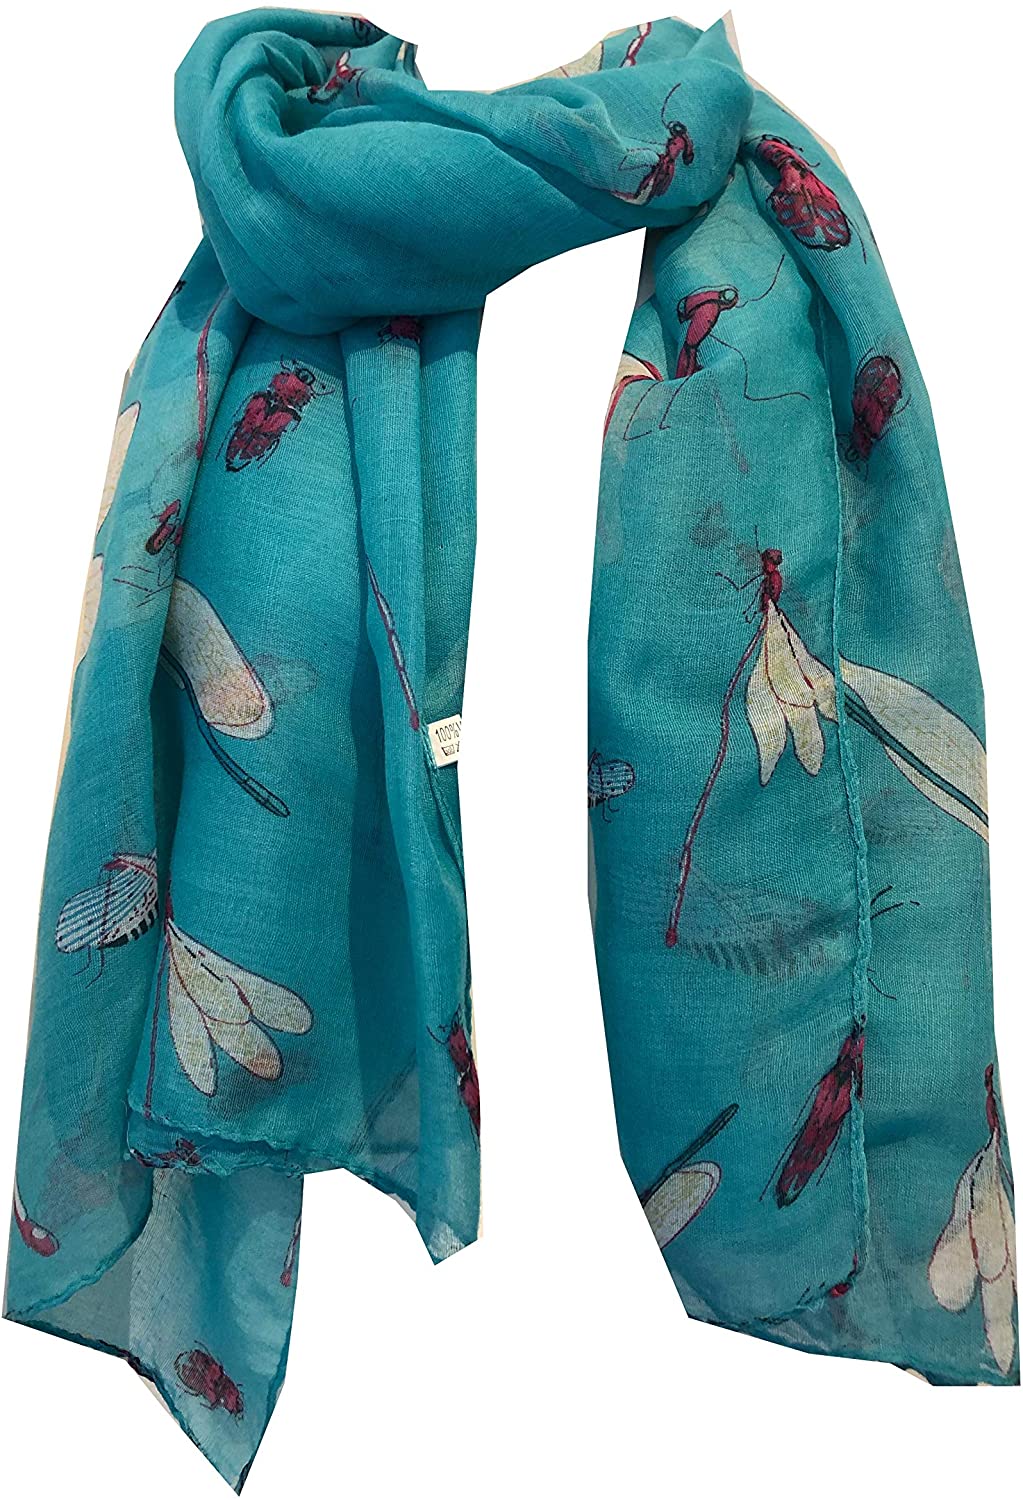 Pamper Yourself Now Aqua with Dragonfly and Bugs Design Long Soft Scarf, Great Present/Gift.